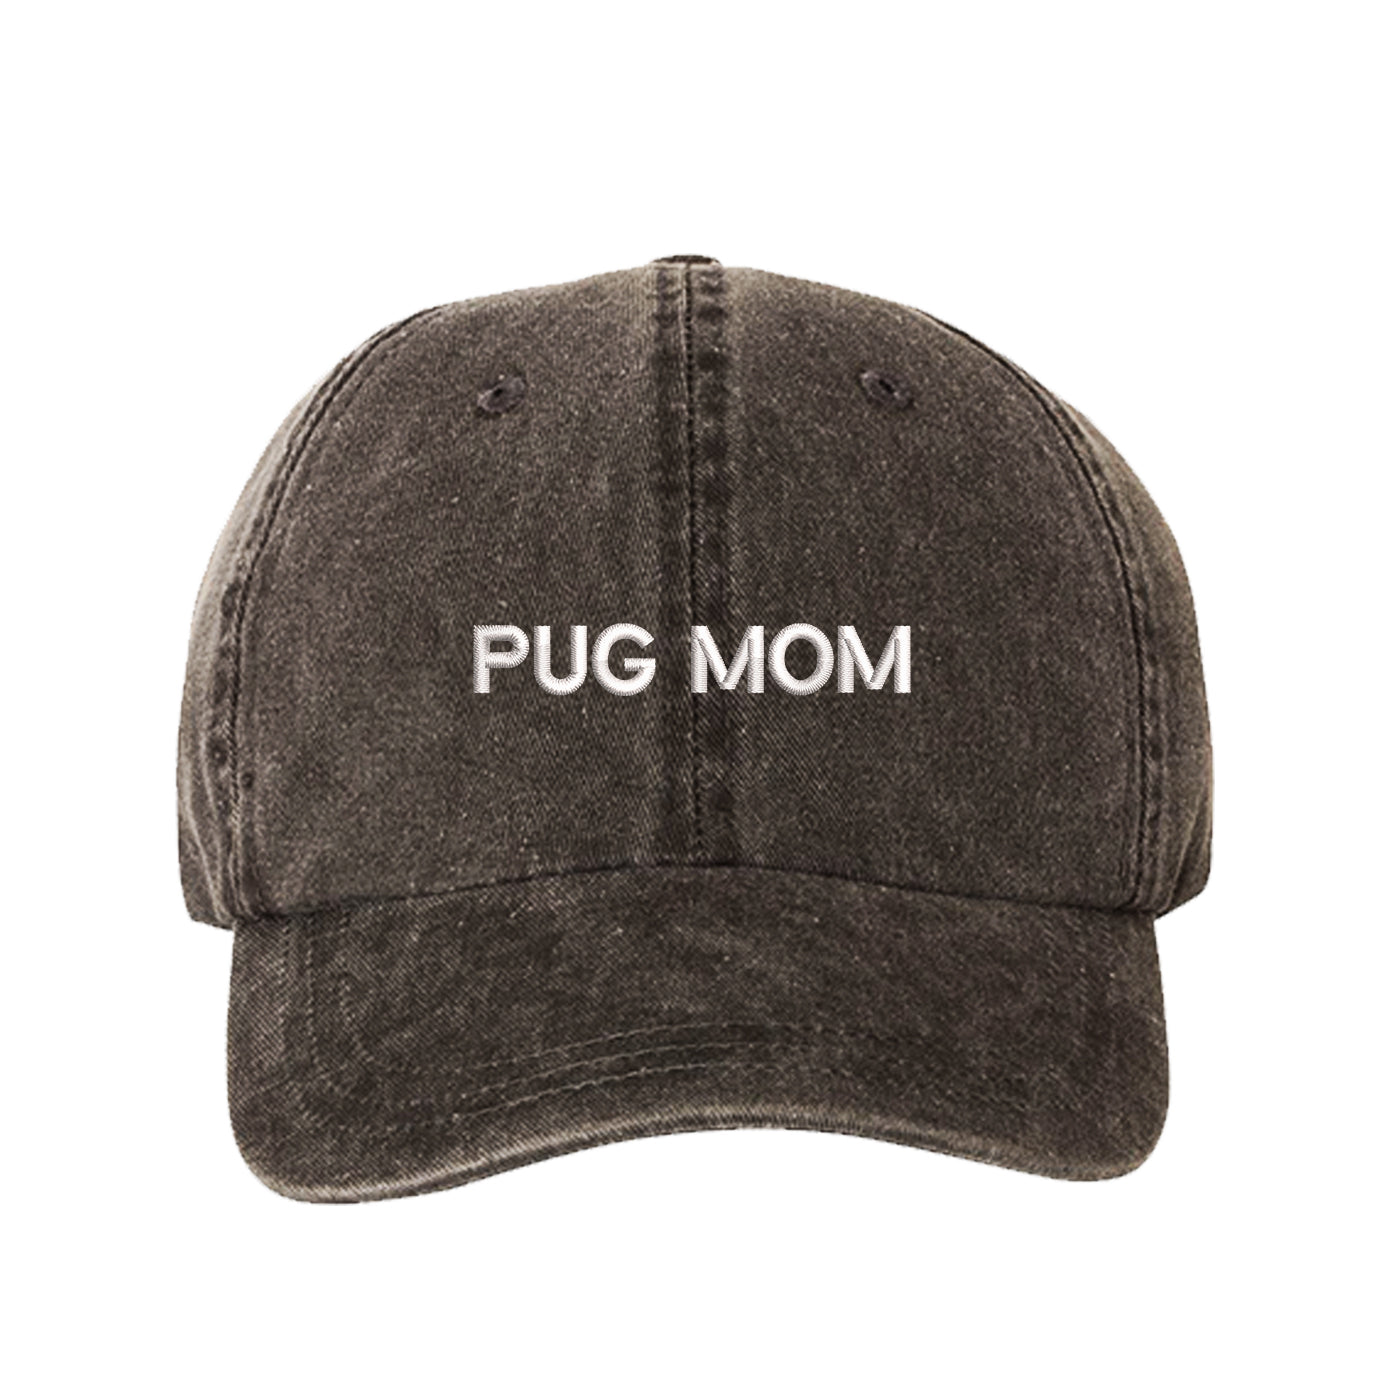 Pug Mom Washed Baseball Hat, Pug Mom Dad Hat, Dog Parent Hats, Embroidered Dad hat, Animal Lover Gifts, Pug Mother, Mothers Day Gift, Pug Mama, DSY Lifestyle Dad Hats, Black Washed Baseball Hat